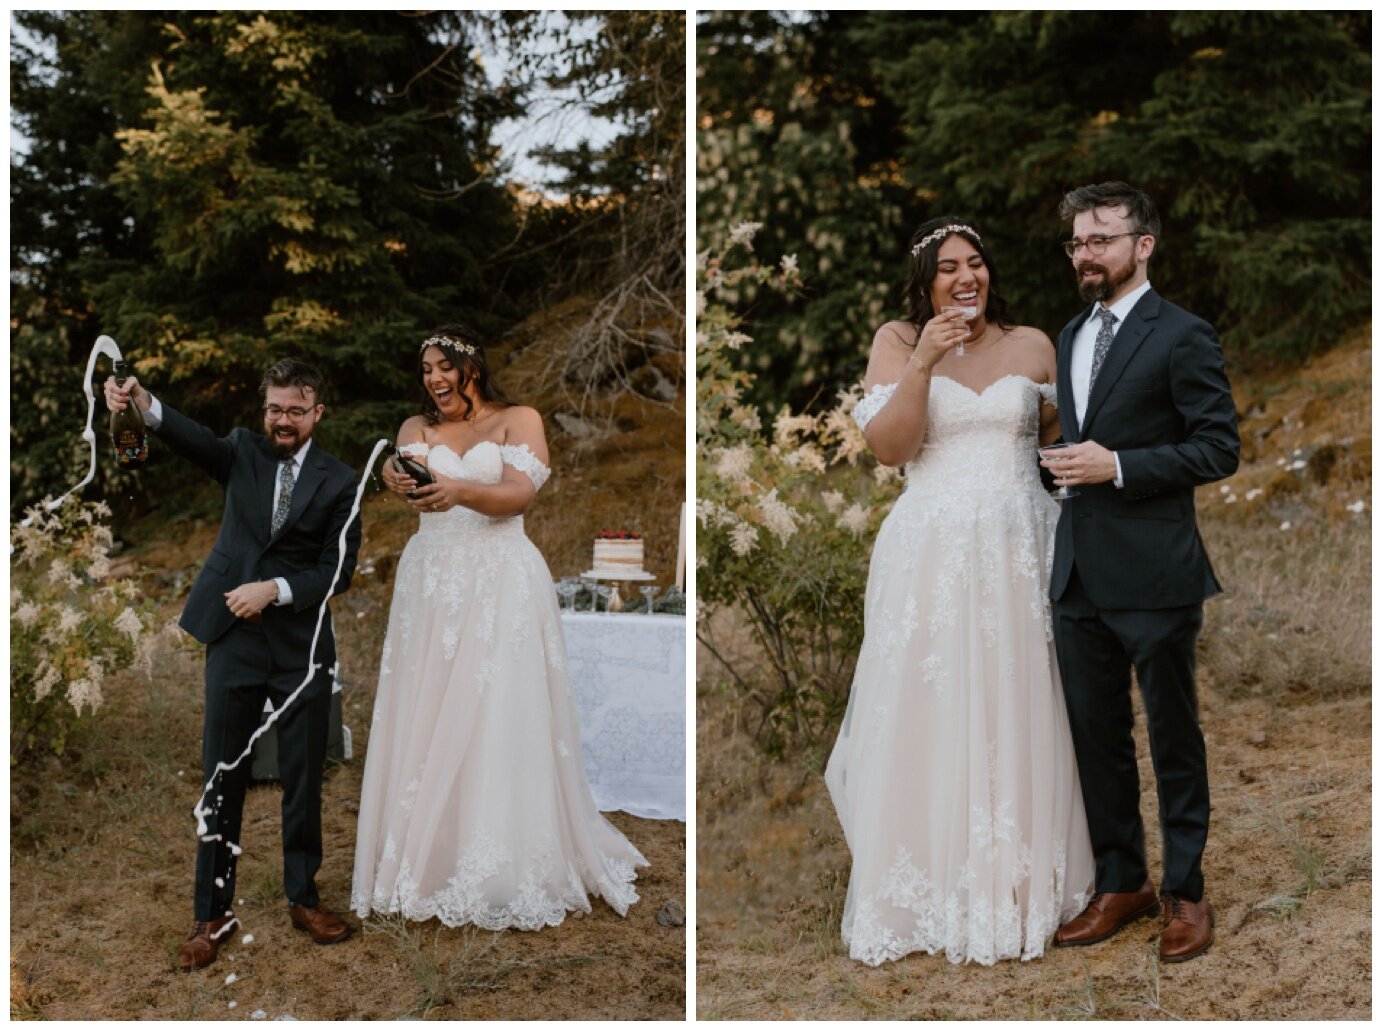 Elopement at Government Cove Peninsula - Madeline Rose Photography - PNW Elopement Photographer_0013.jpg